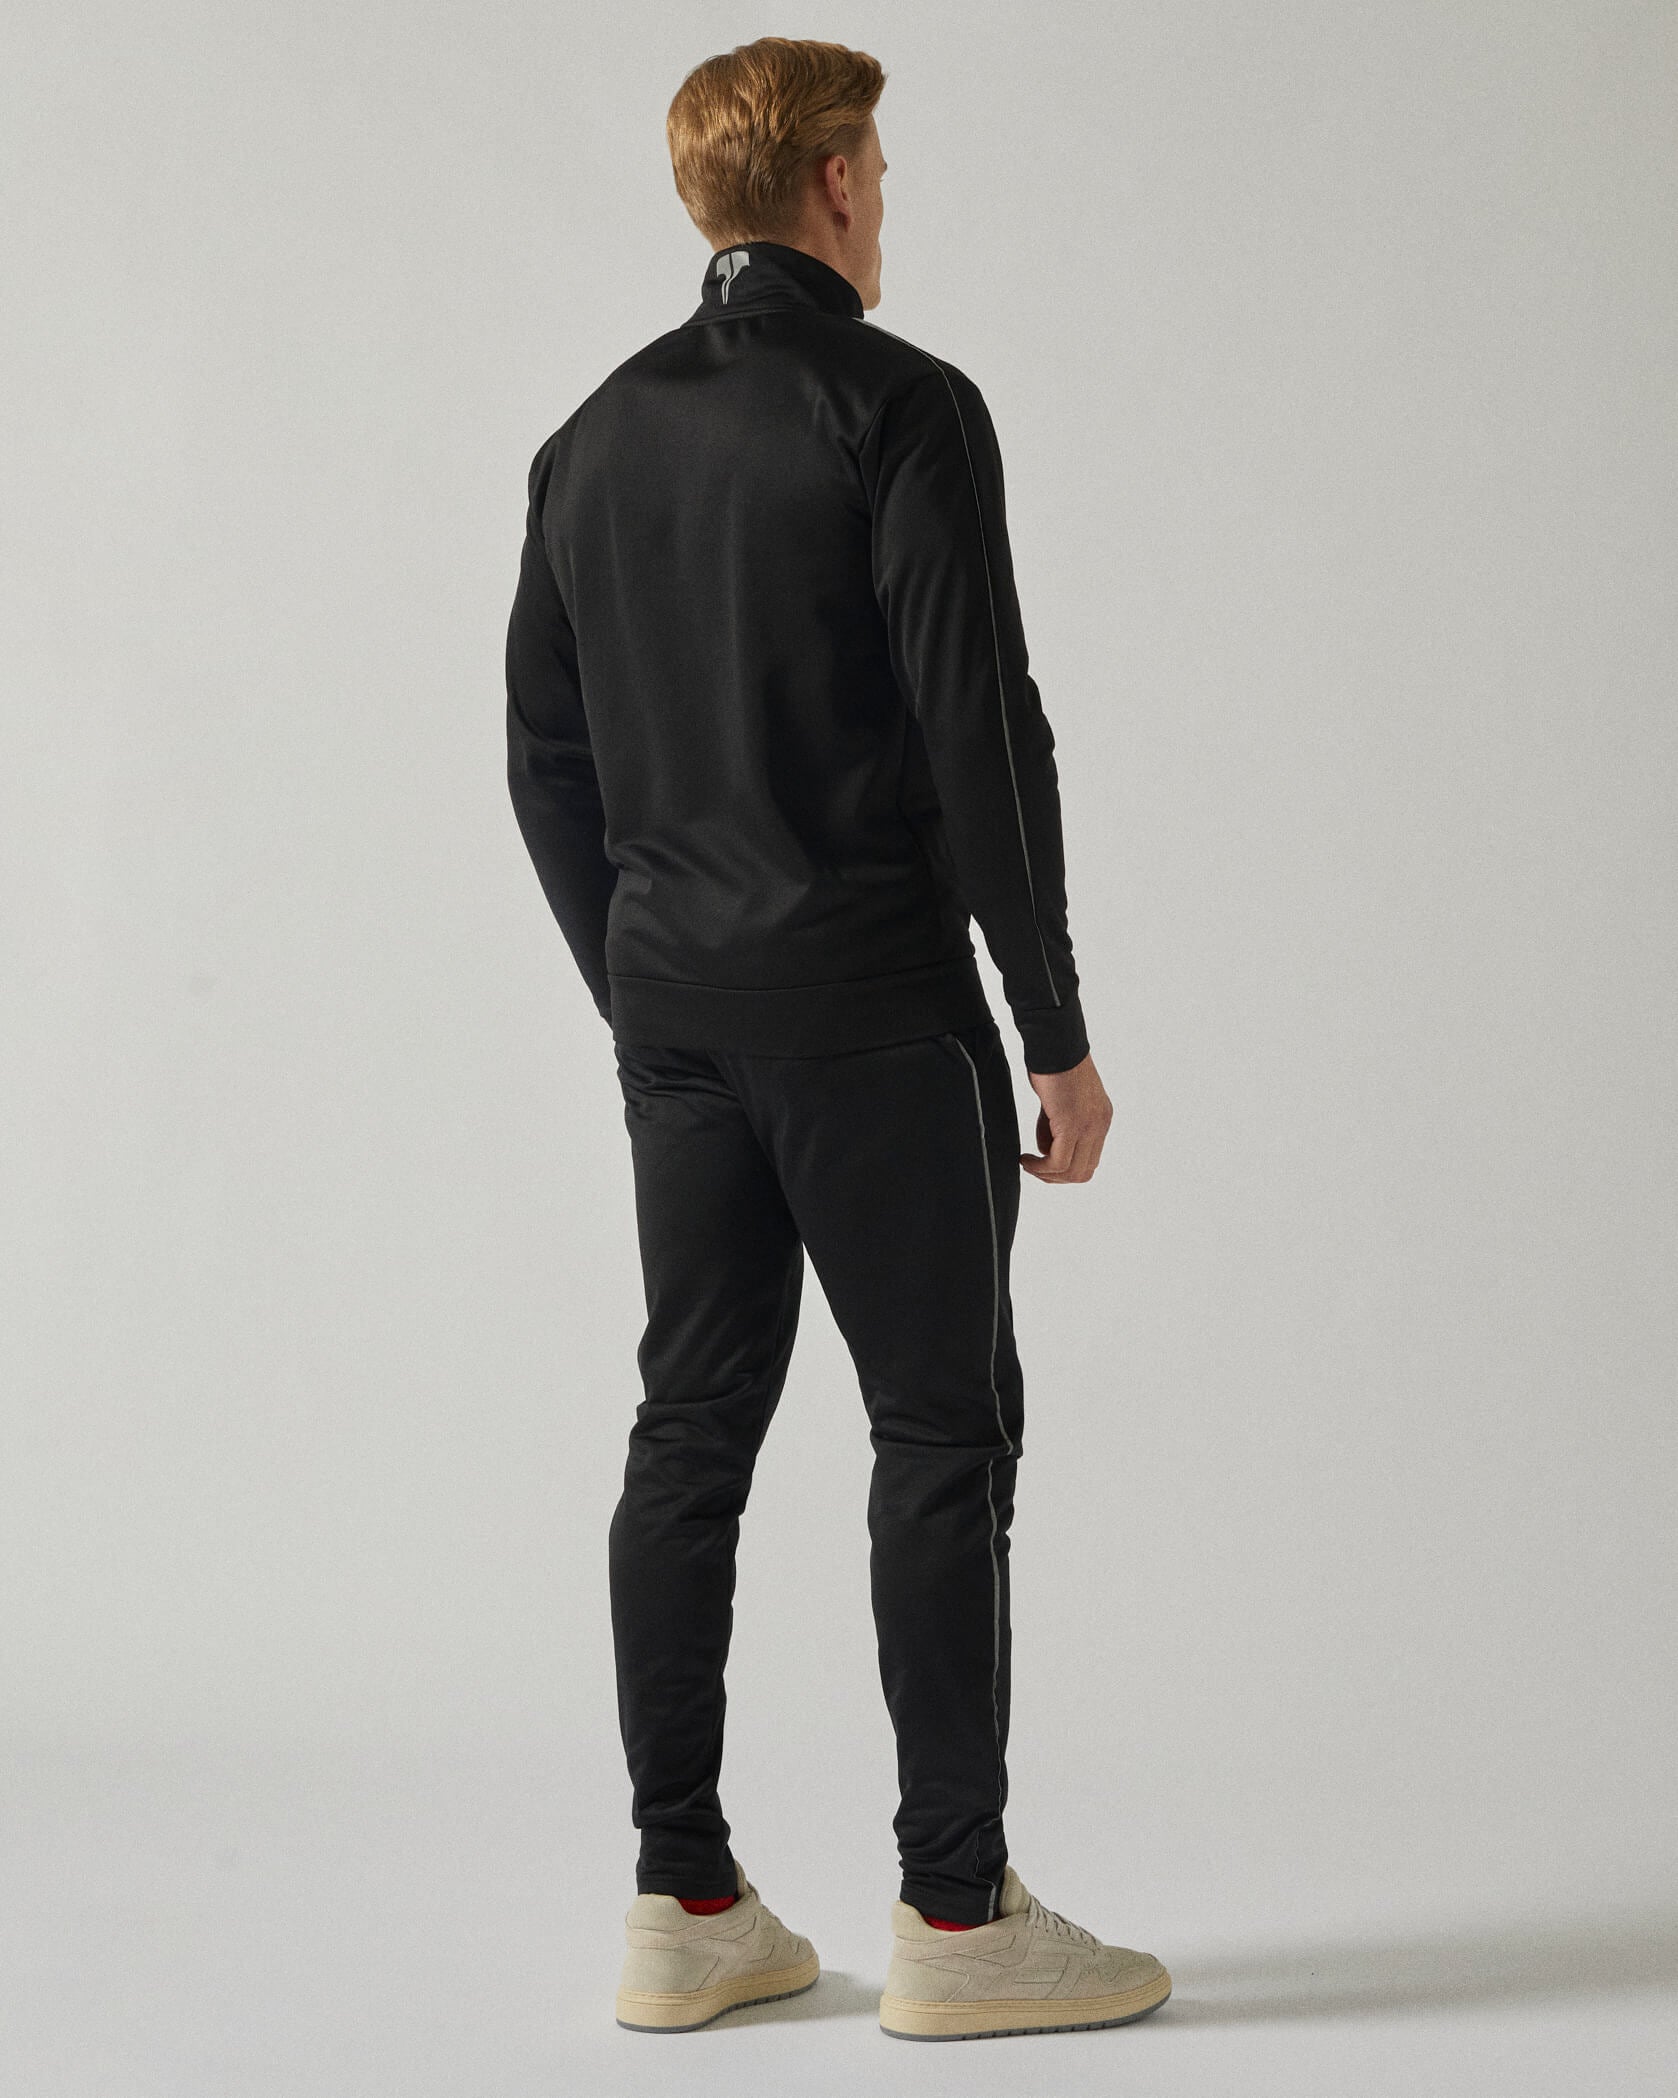 Twinzz Tech black tracksuit on model from back